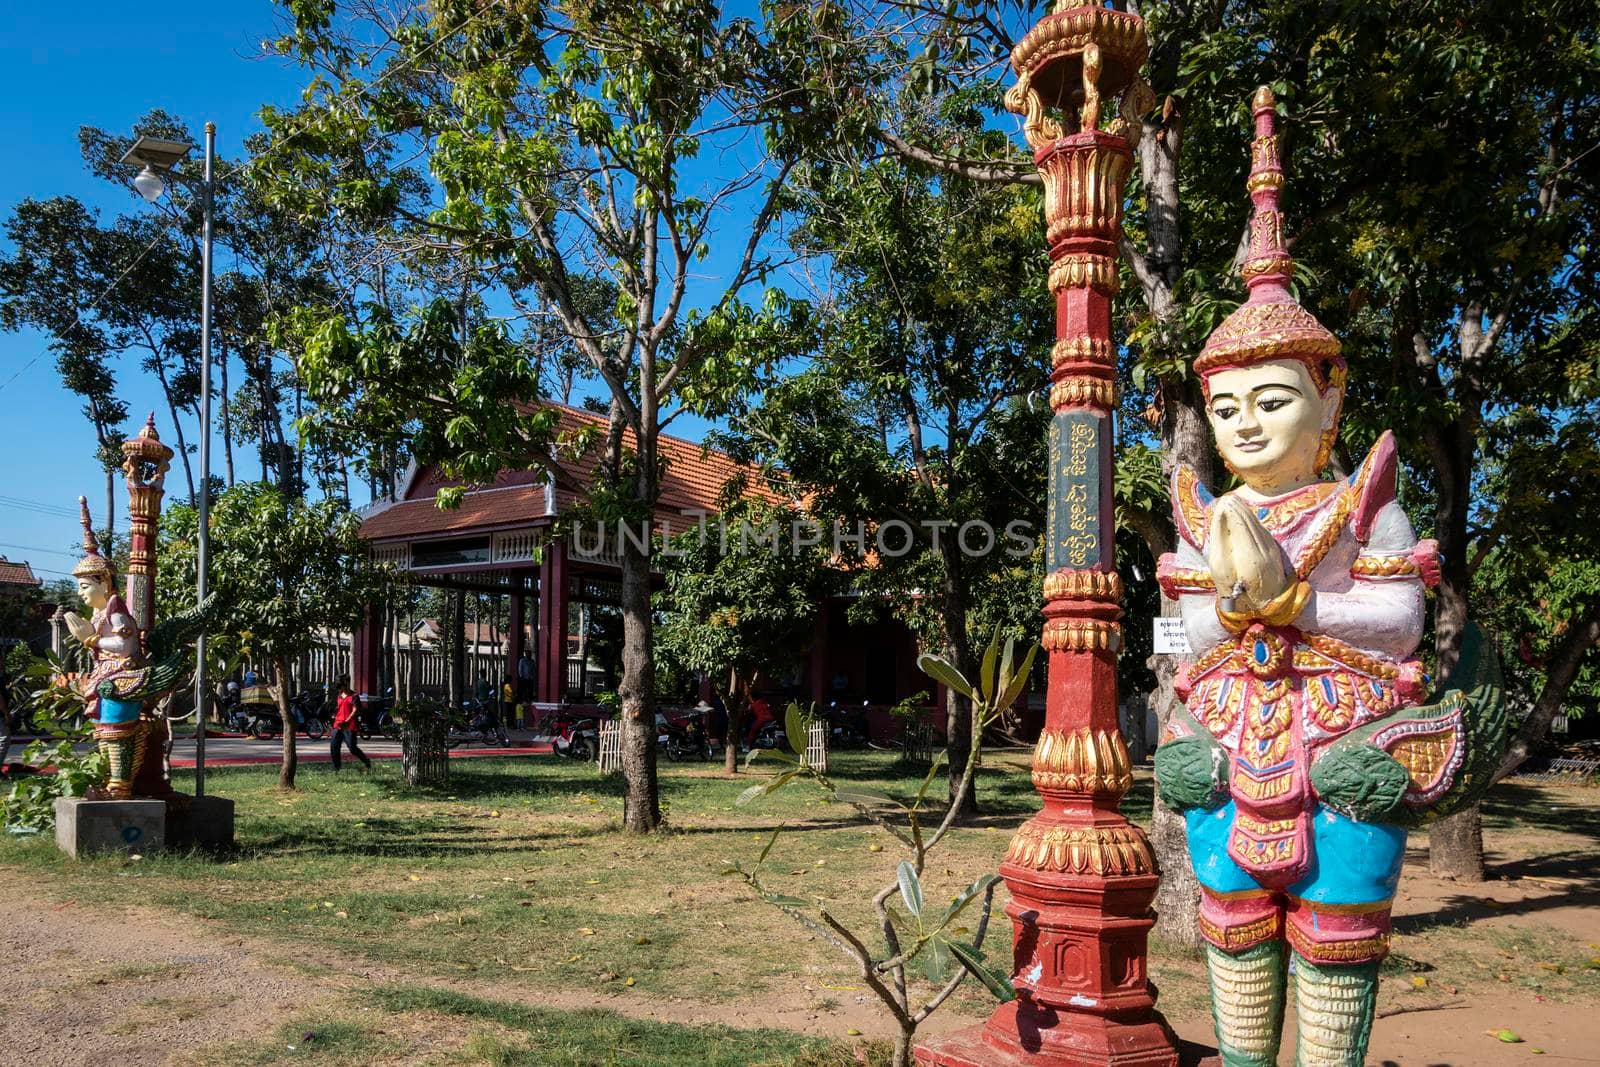 buddhist religious Khmer statue outdoor at Wat Svay Andet UNESCO Lakhon Khol heritage temple in Kandal Province Cambodia